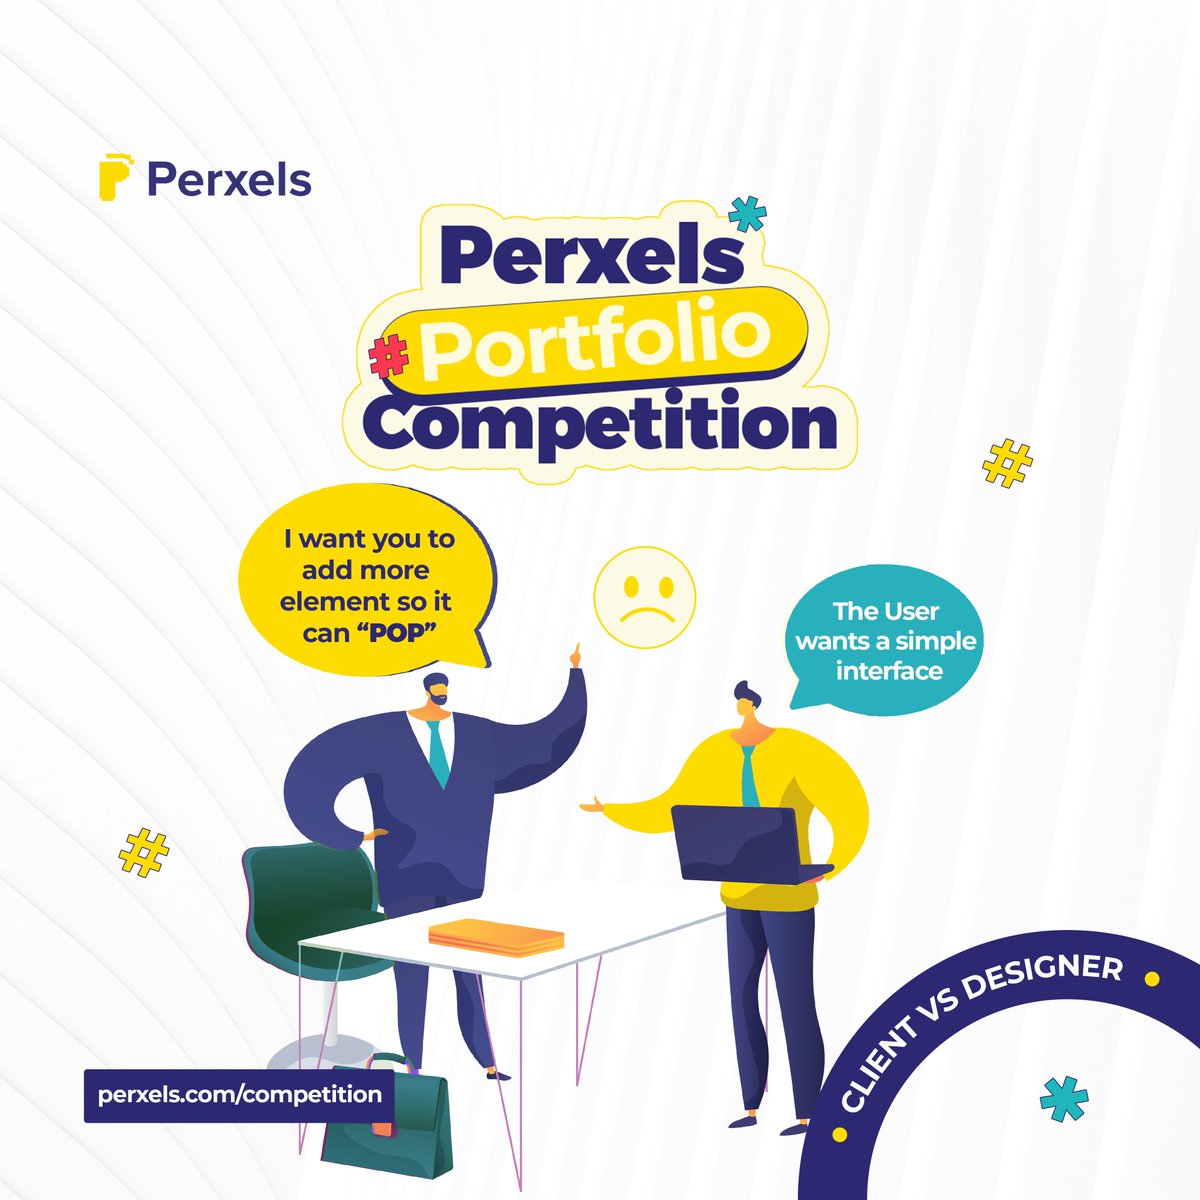 If you're working on a project and your user research reveals needs that differ from the client's initial vision, how would you approach this situation? Here's my strategy: A mini thread🧵 #perxelscompetition @perxels